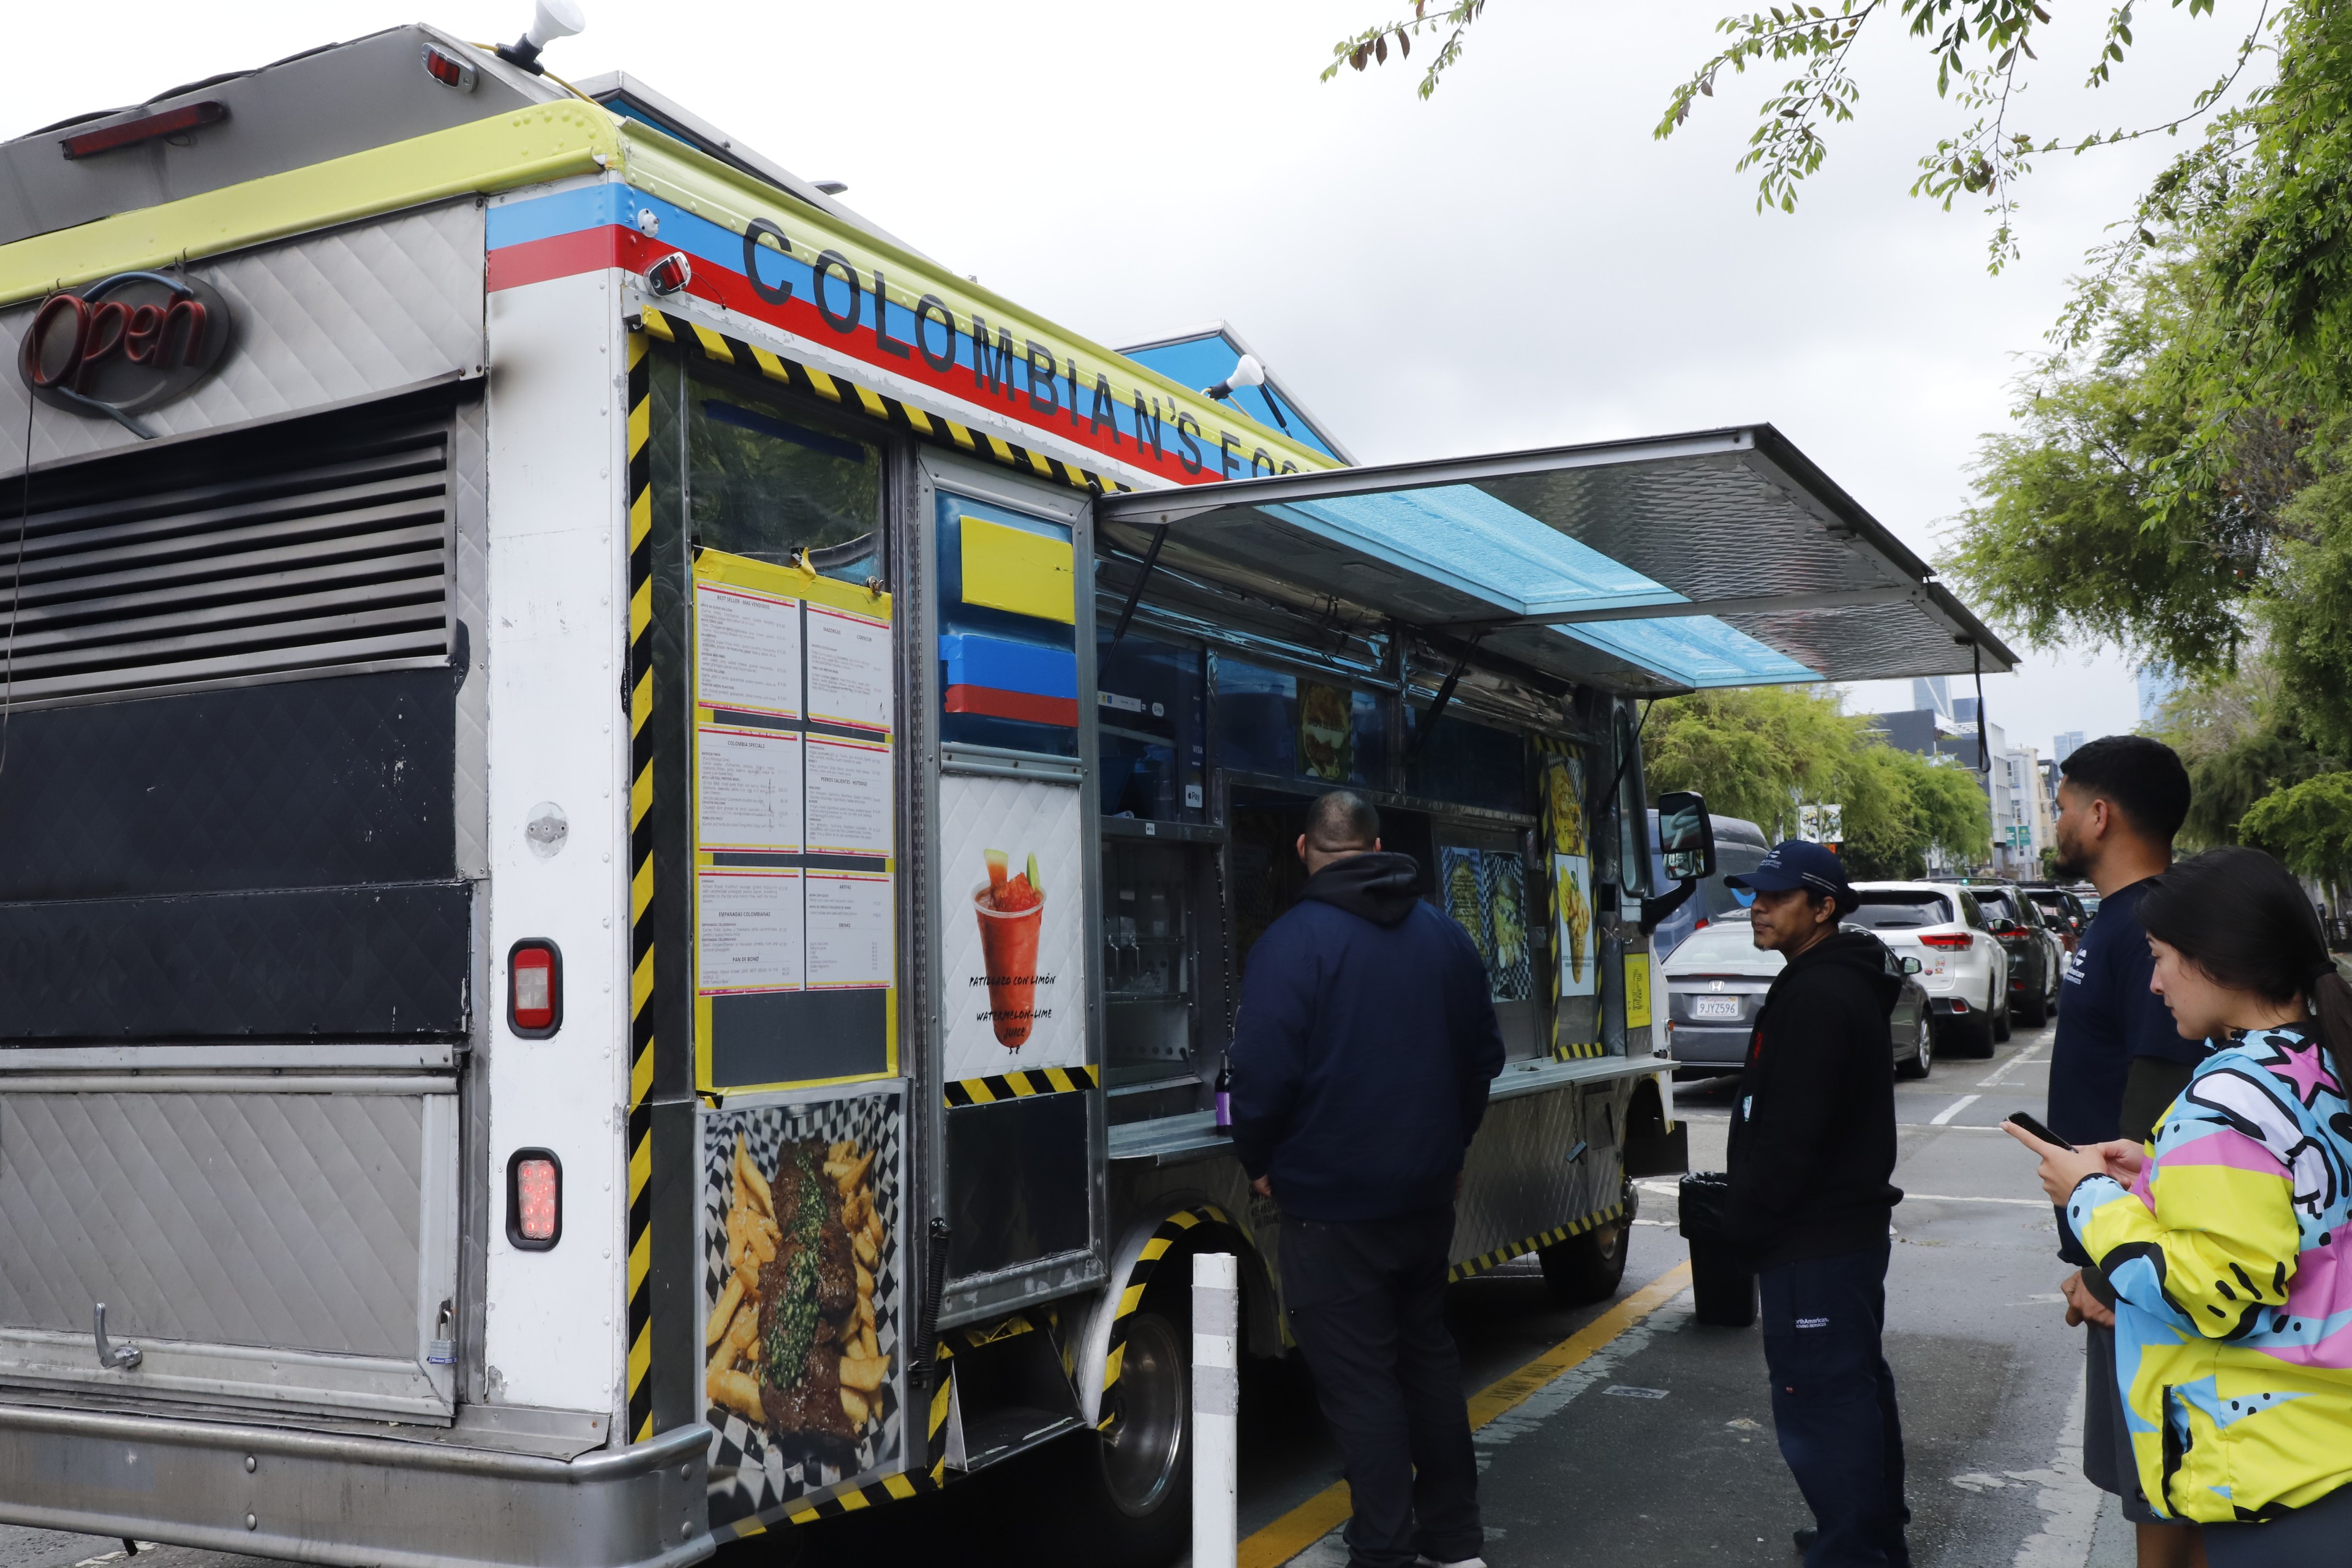 A colorful food truck with &quot;COLOMBIAN FOOD&quot; on it and people queuing to order.